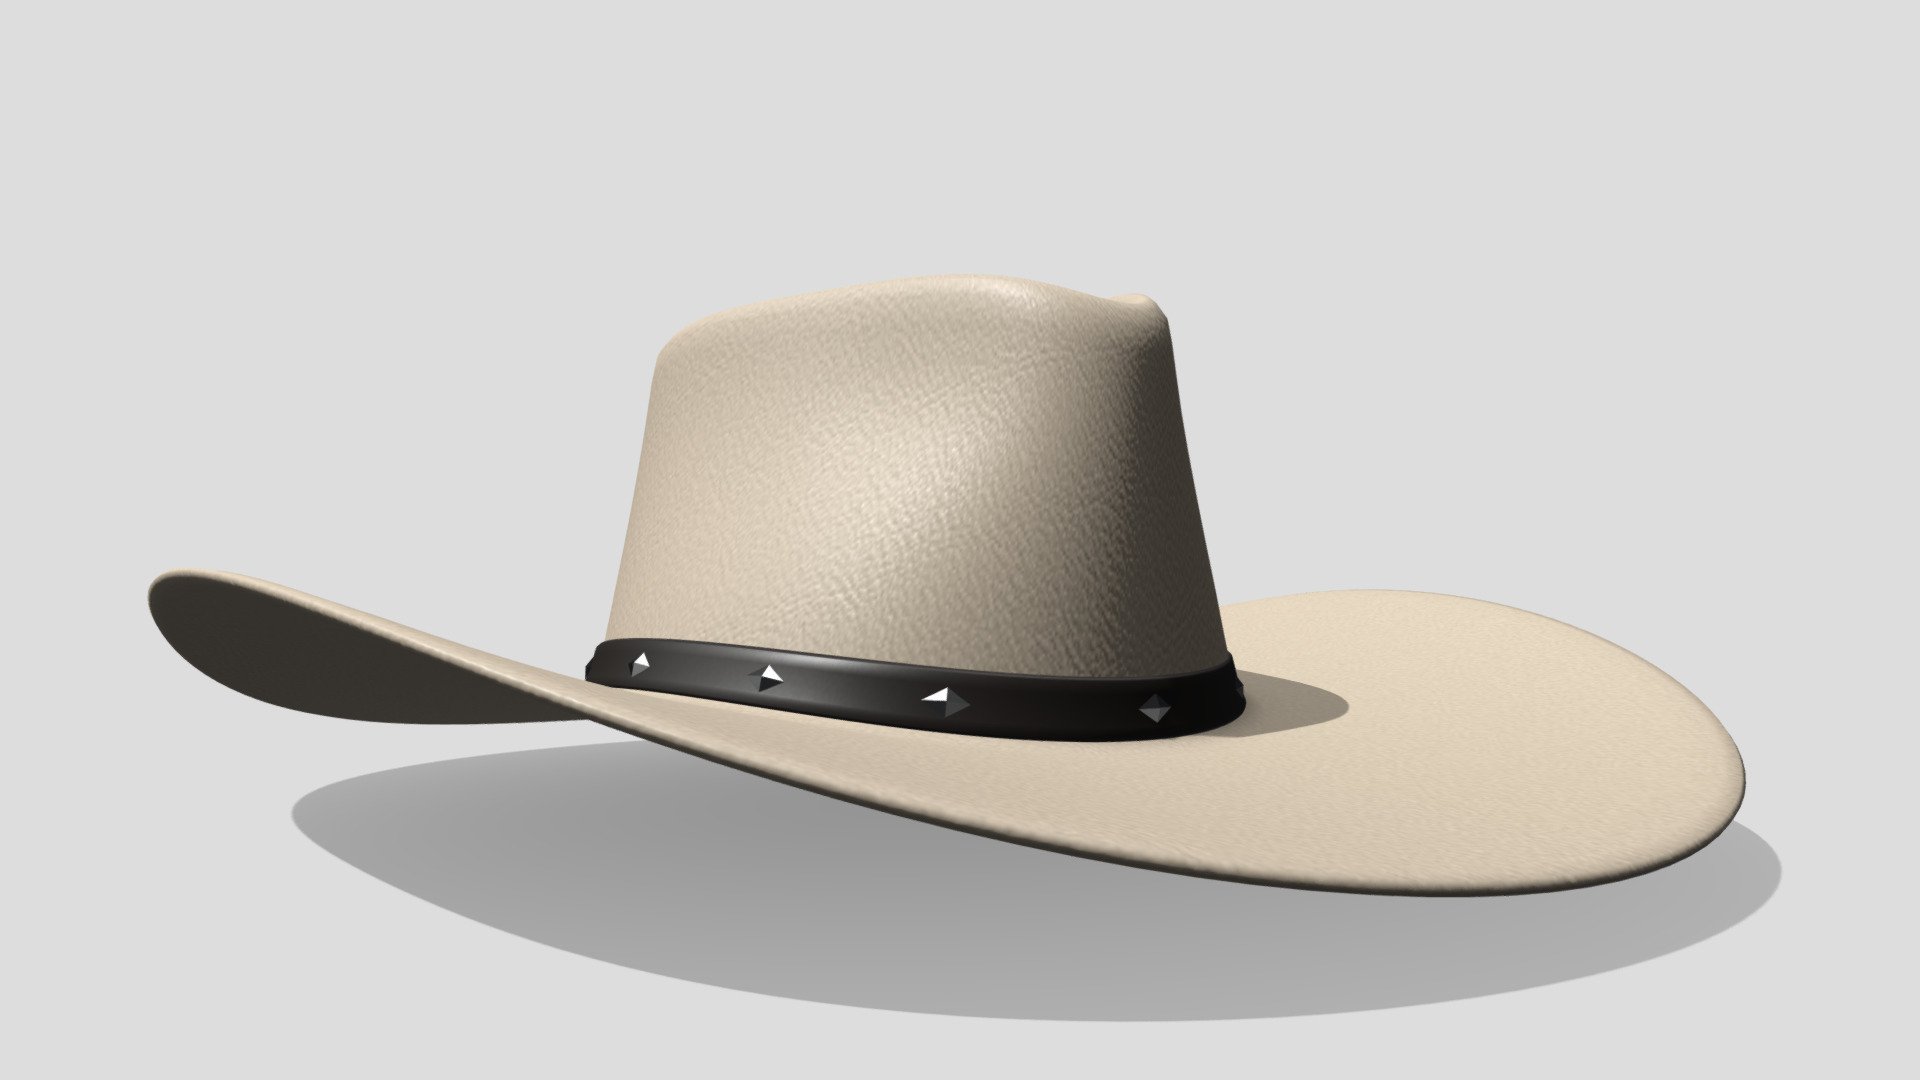 A simple ten-gallon hat, tipical wear for cowboys and western riders.
Made with 3DsMax and Substance Painter - Cowboy hat - 3D model by antonia_s 3d model